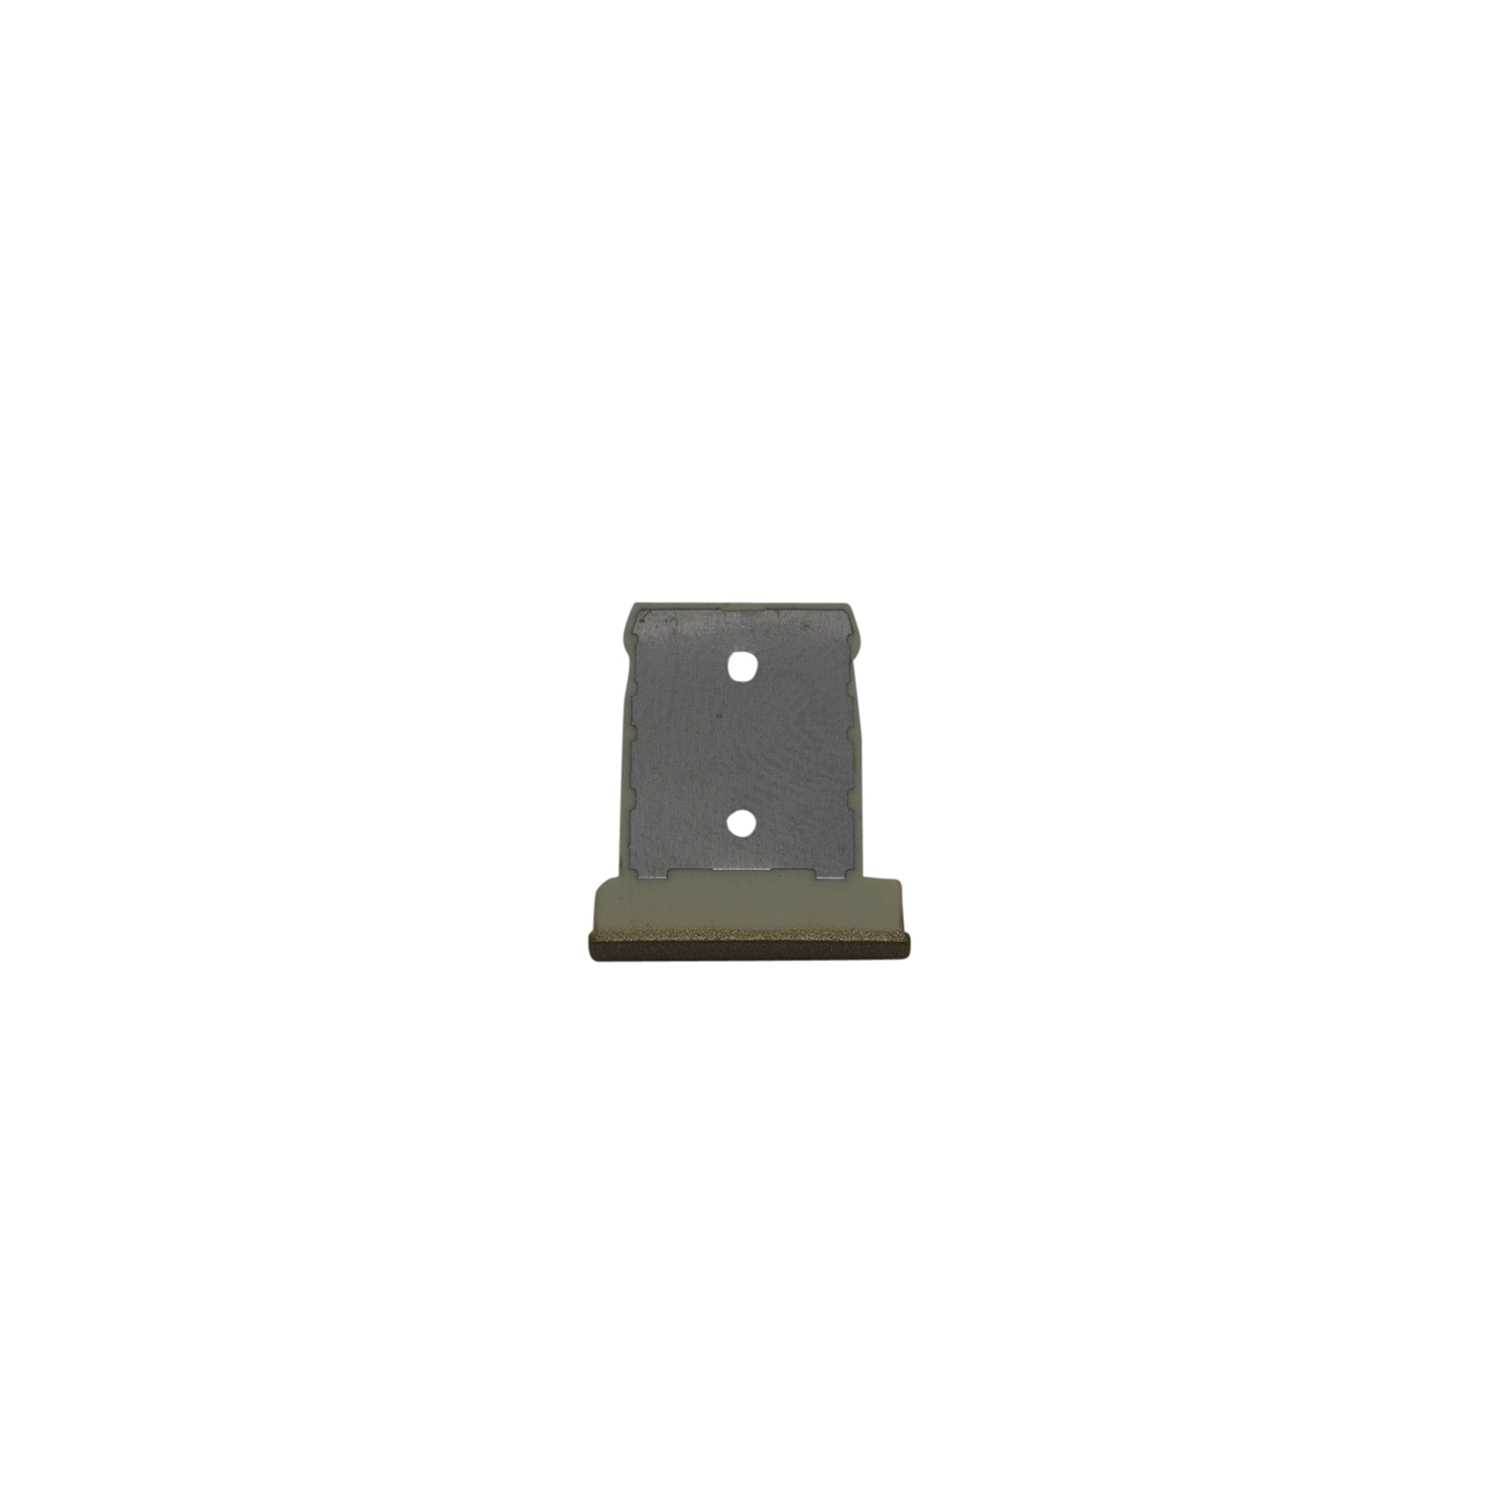 Replacement Part for HTC One M9 Nano SIM Card Tray - Gold